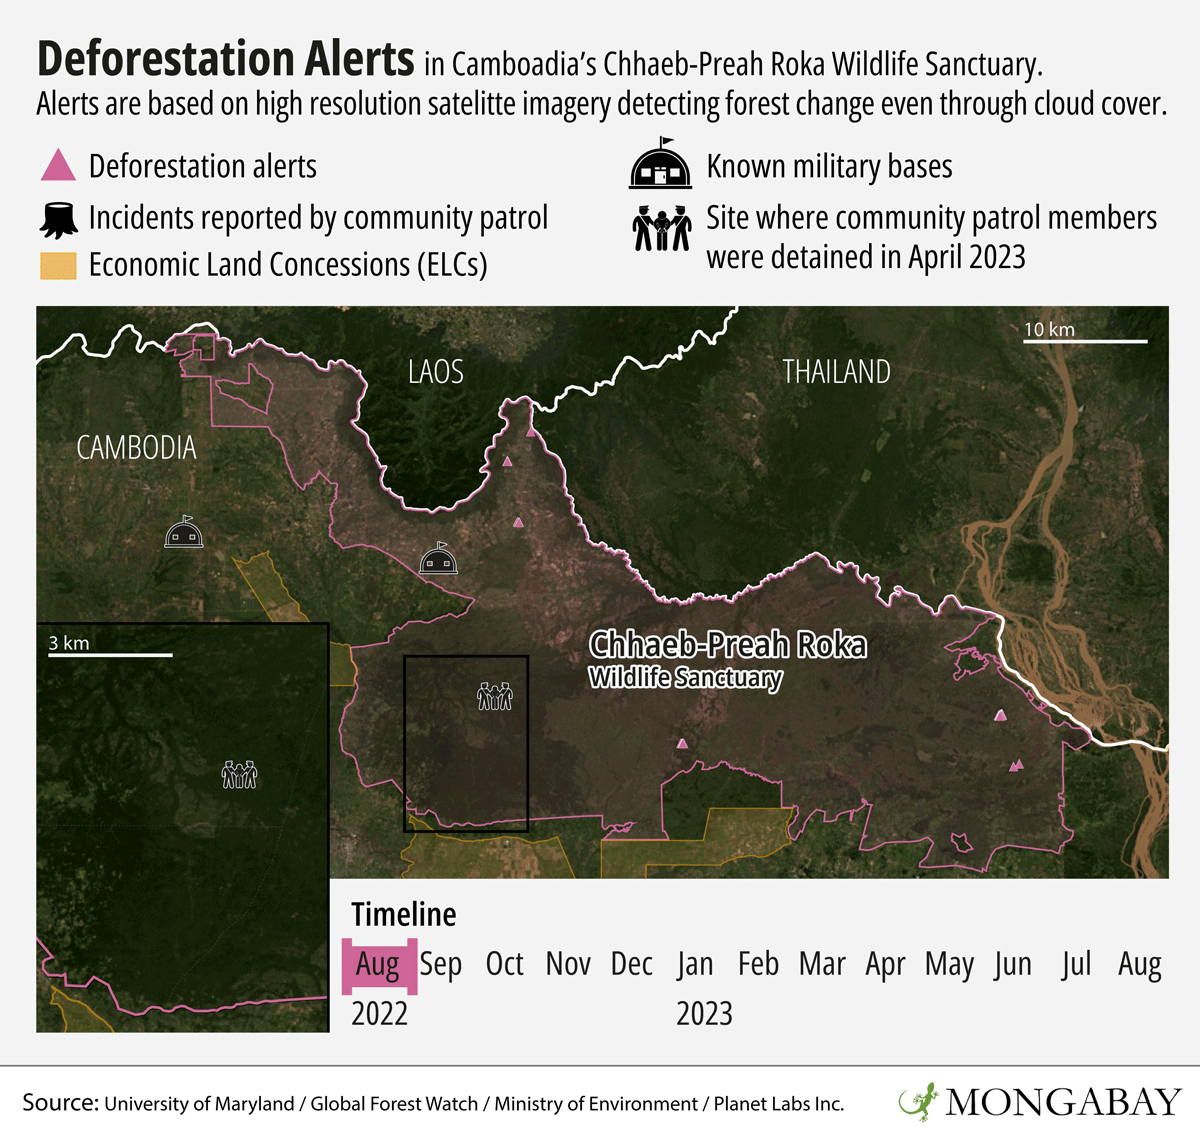 This timelapse shows the discrepancies between deforestation alerts detected by satellite and freshly cut tree stumps documented by community patrols within Chhaeb-Preah Roka Wildlife Sanctuary. Image by Andrés Alegría / Mongabay.